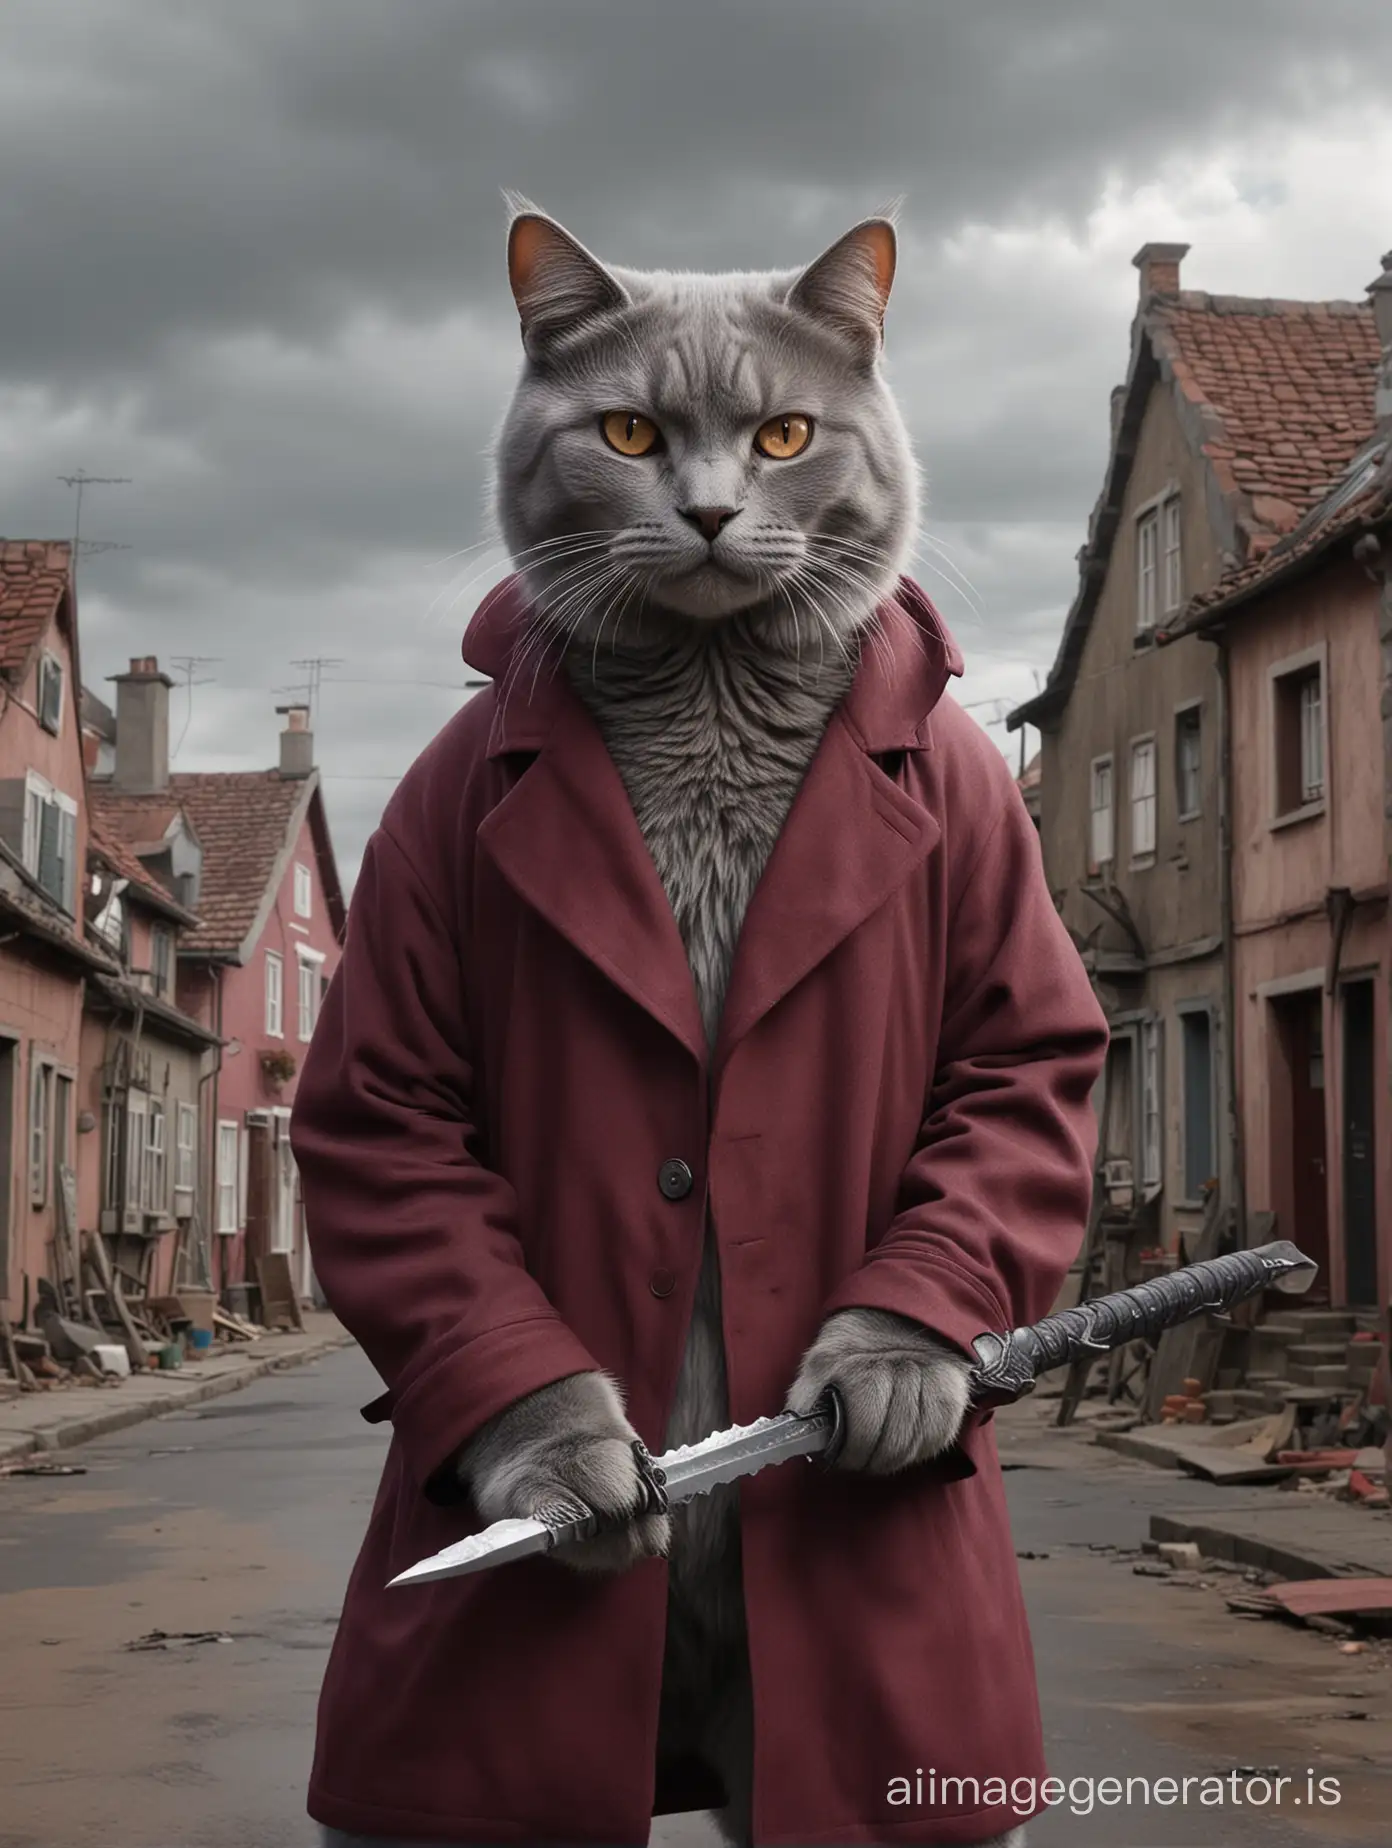 4k, realistic, HD. Giant light grey cat with grey eyes in burgundy coat with sword in hand demolish very small houses in town look like Godzilla style